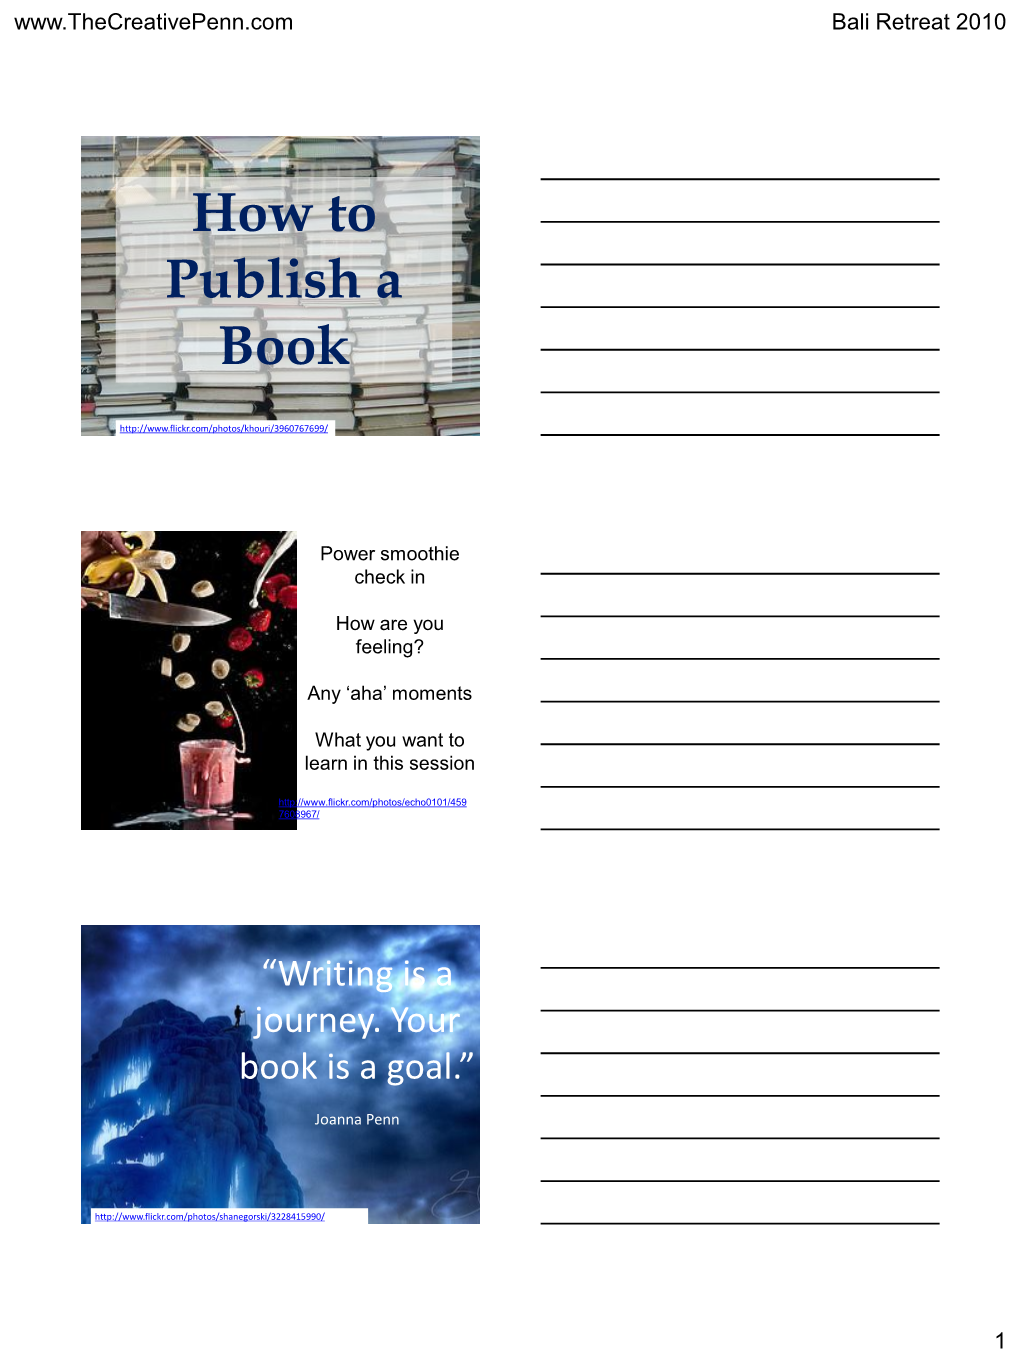 How to Publish a Book